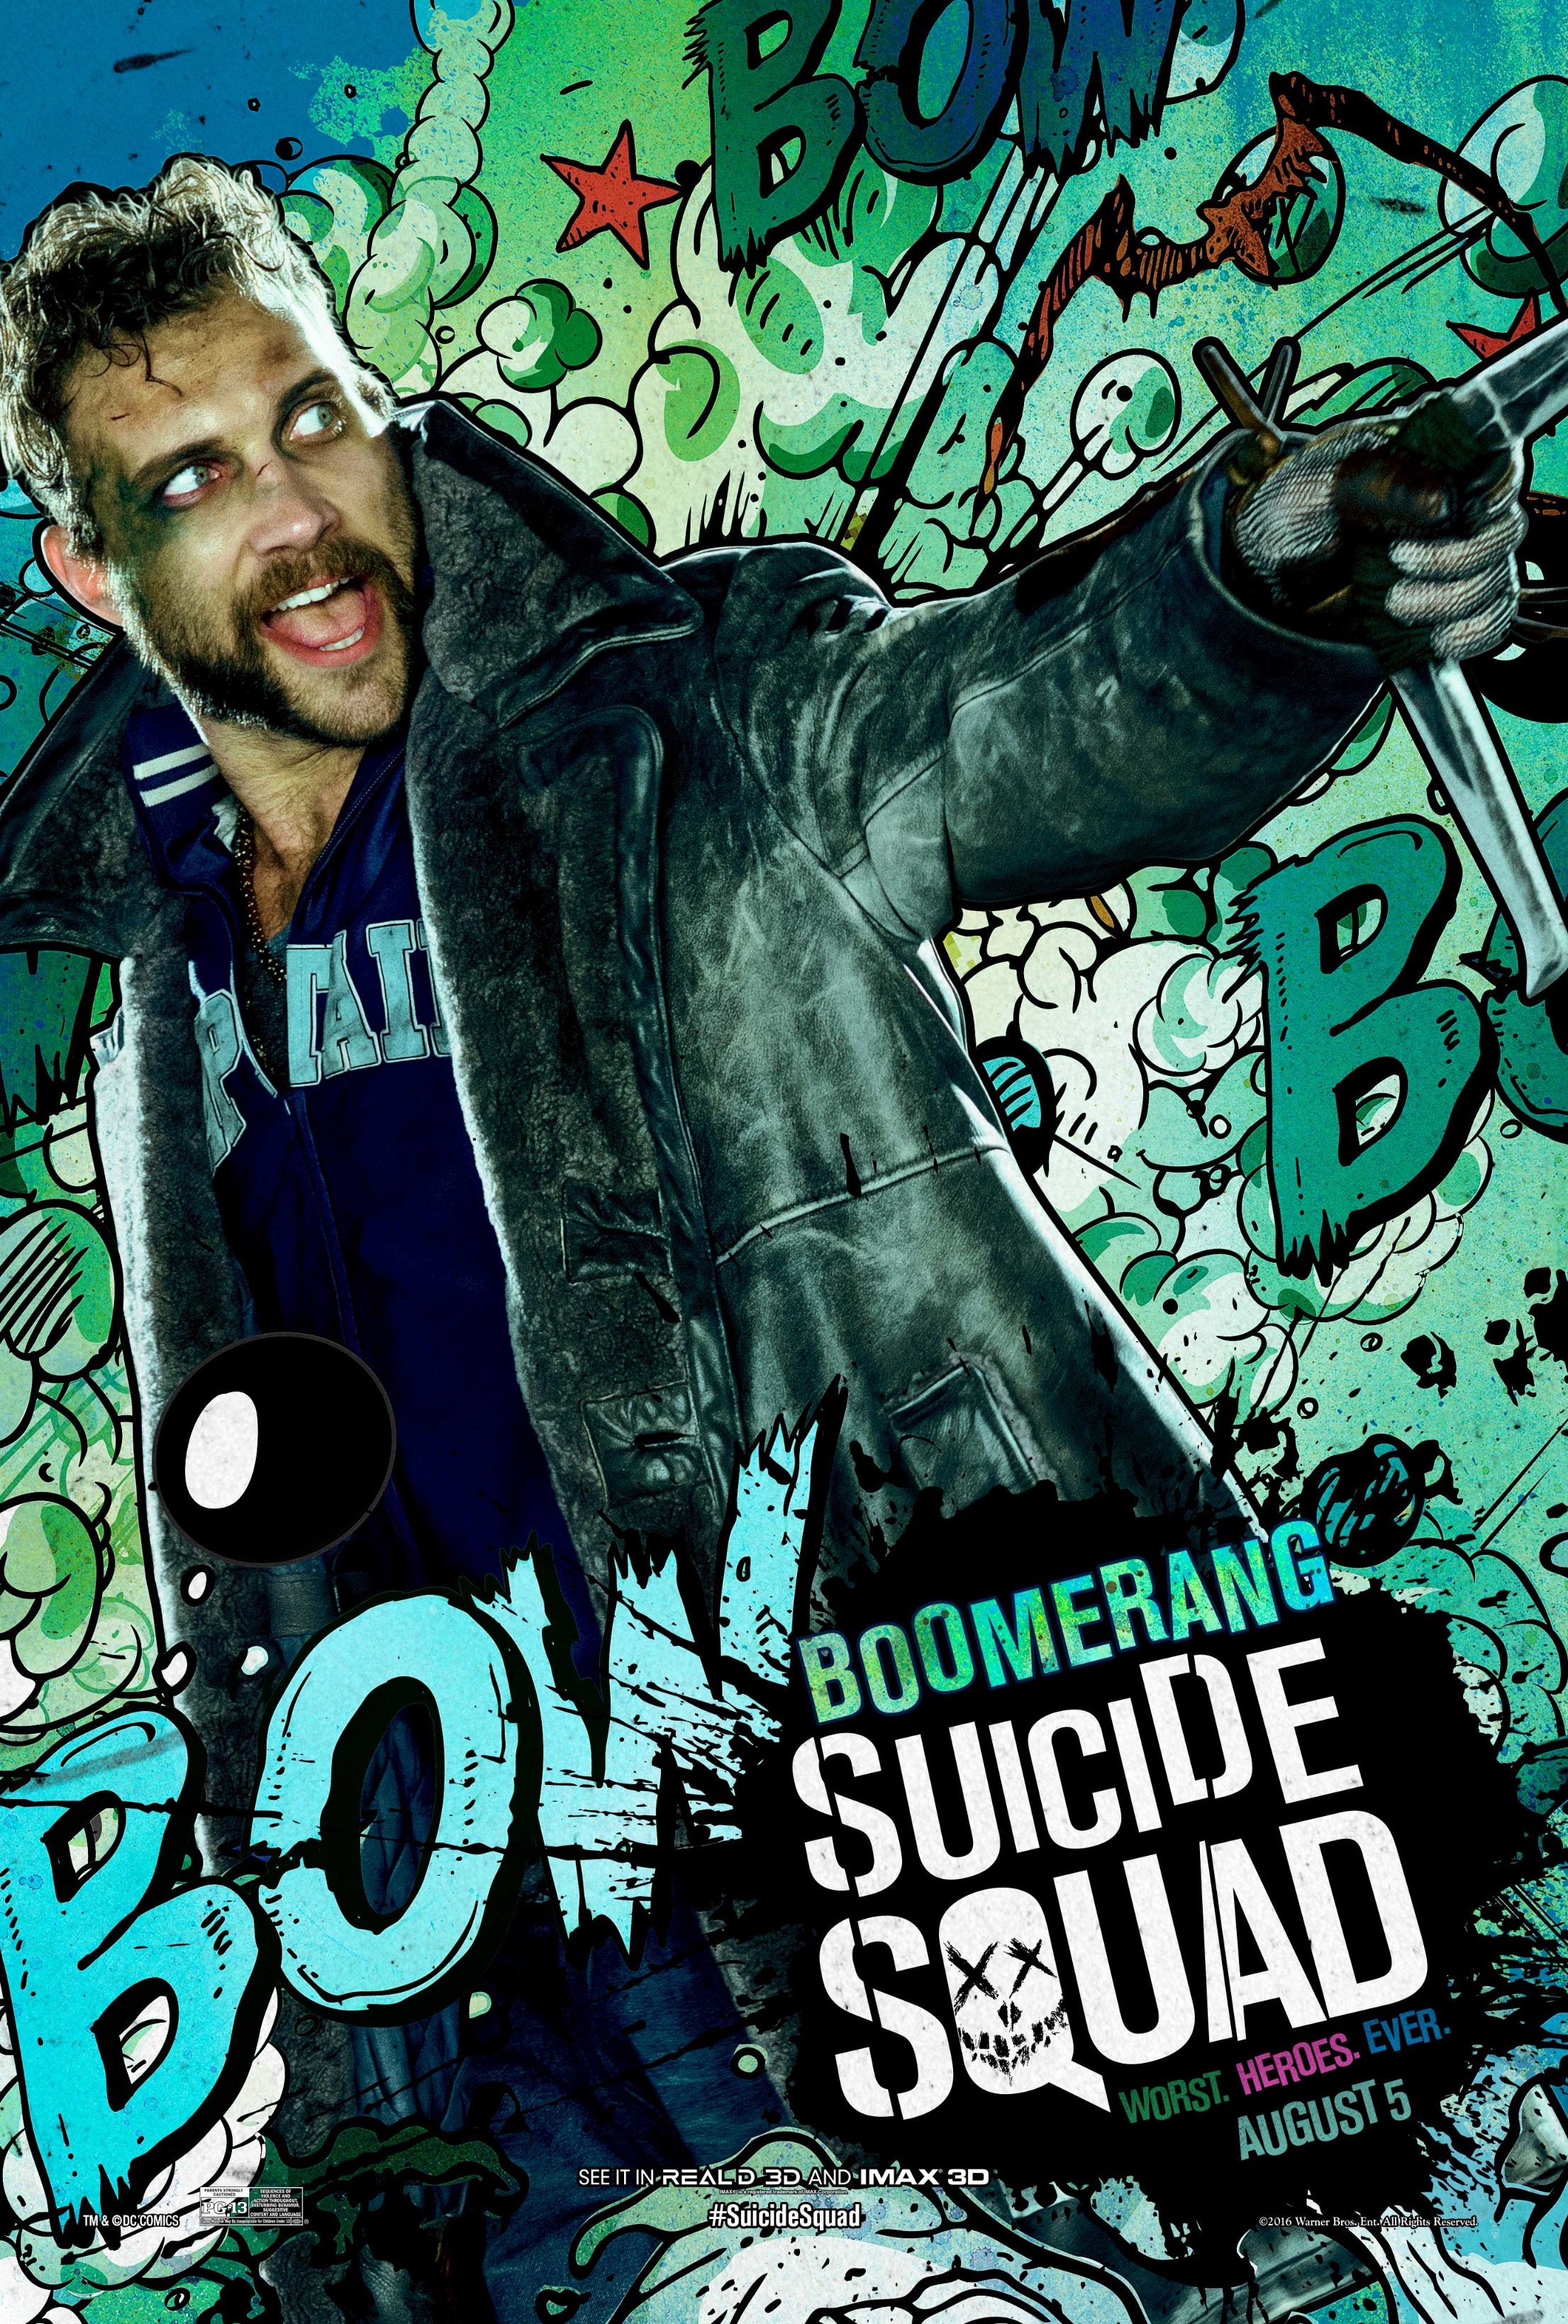 Suicide Squad Captain Boomerang Poster wallpaper 2018 in Movies